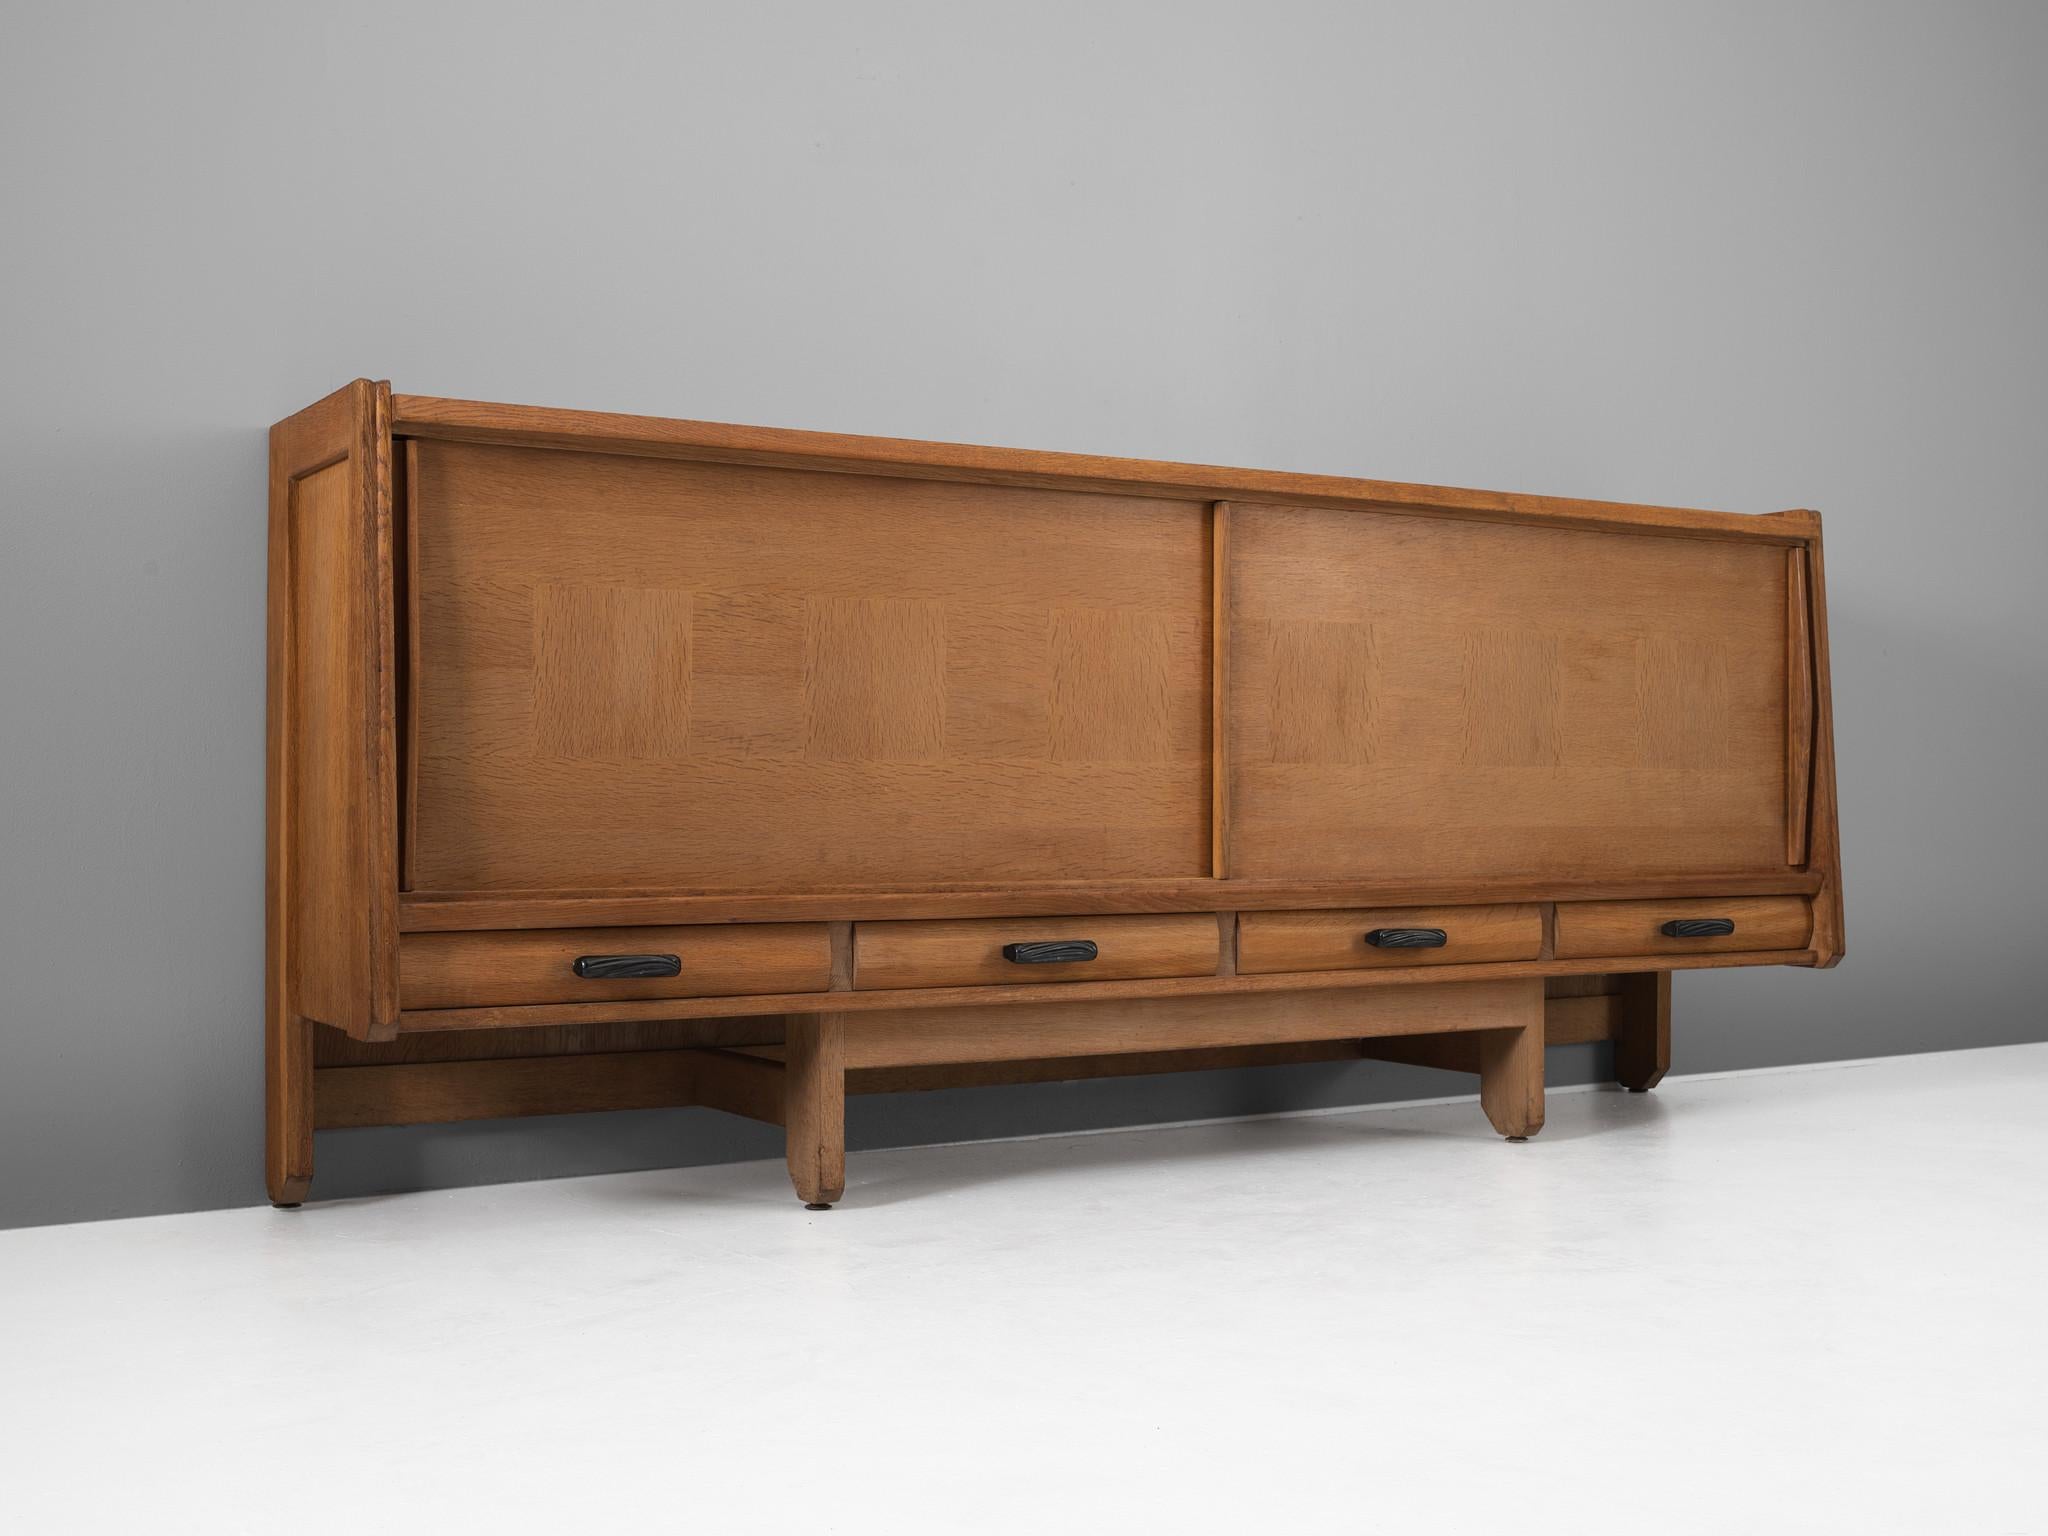 Guillerme & Chambron, credenza, oak, France, 1960s. 

Medium-sized sideboard with two sliding doors by French designer duo Guillerme and Chambron. This quite solid cabinet holds beautiful inlaid woodwork. Underneath the sliding doors there are